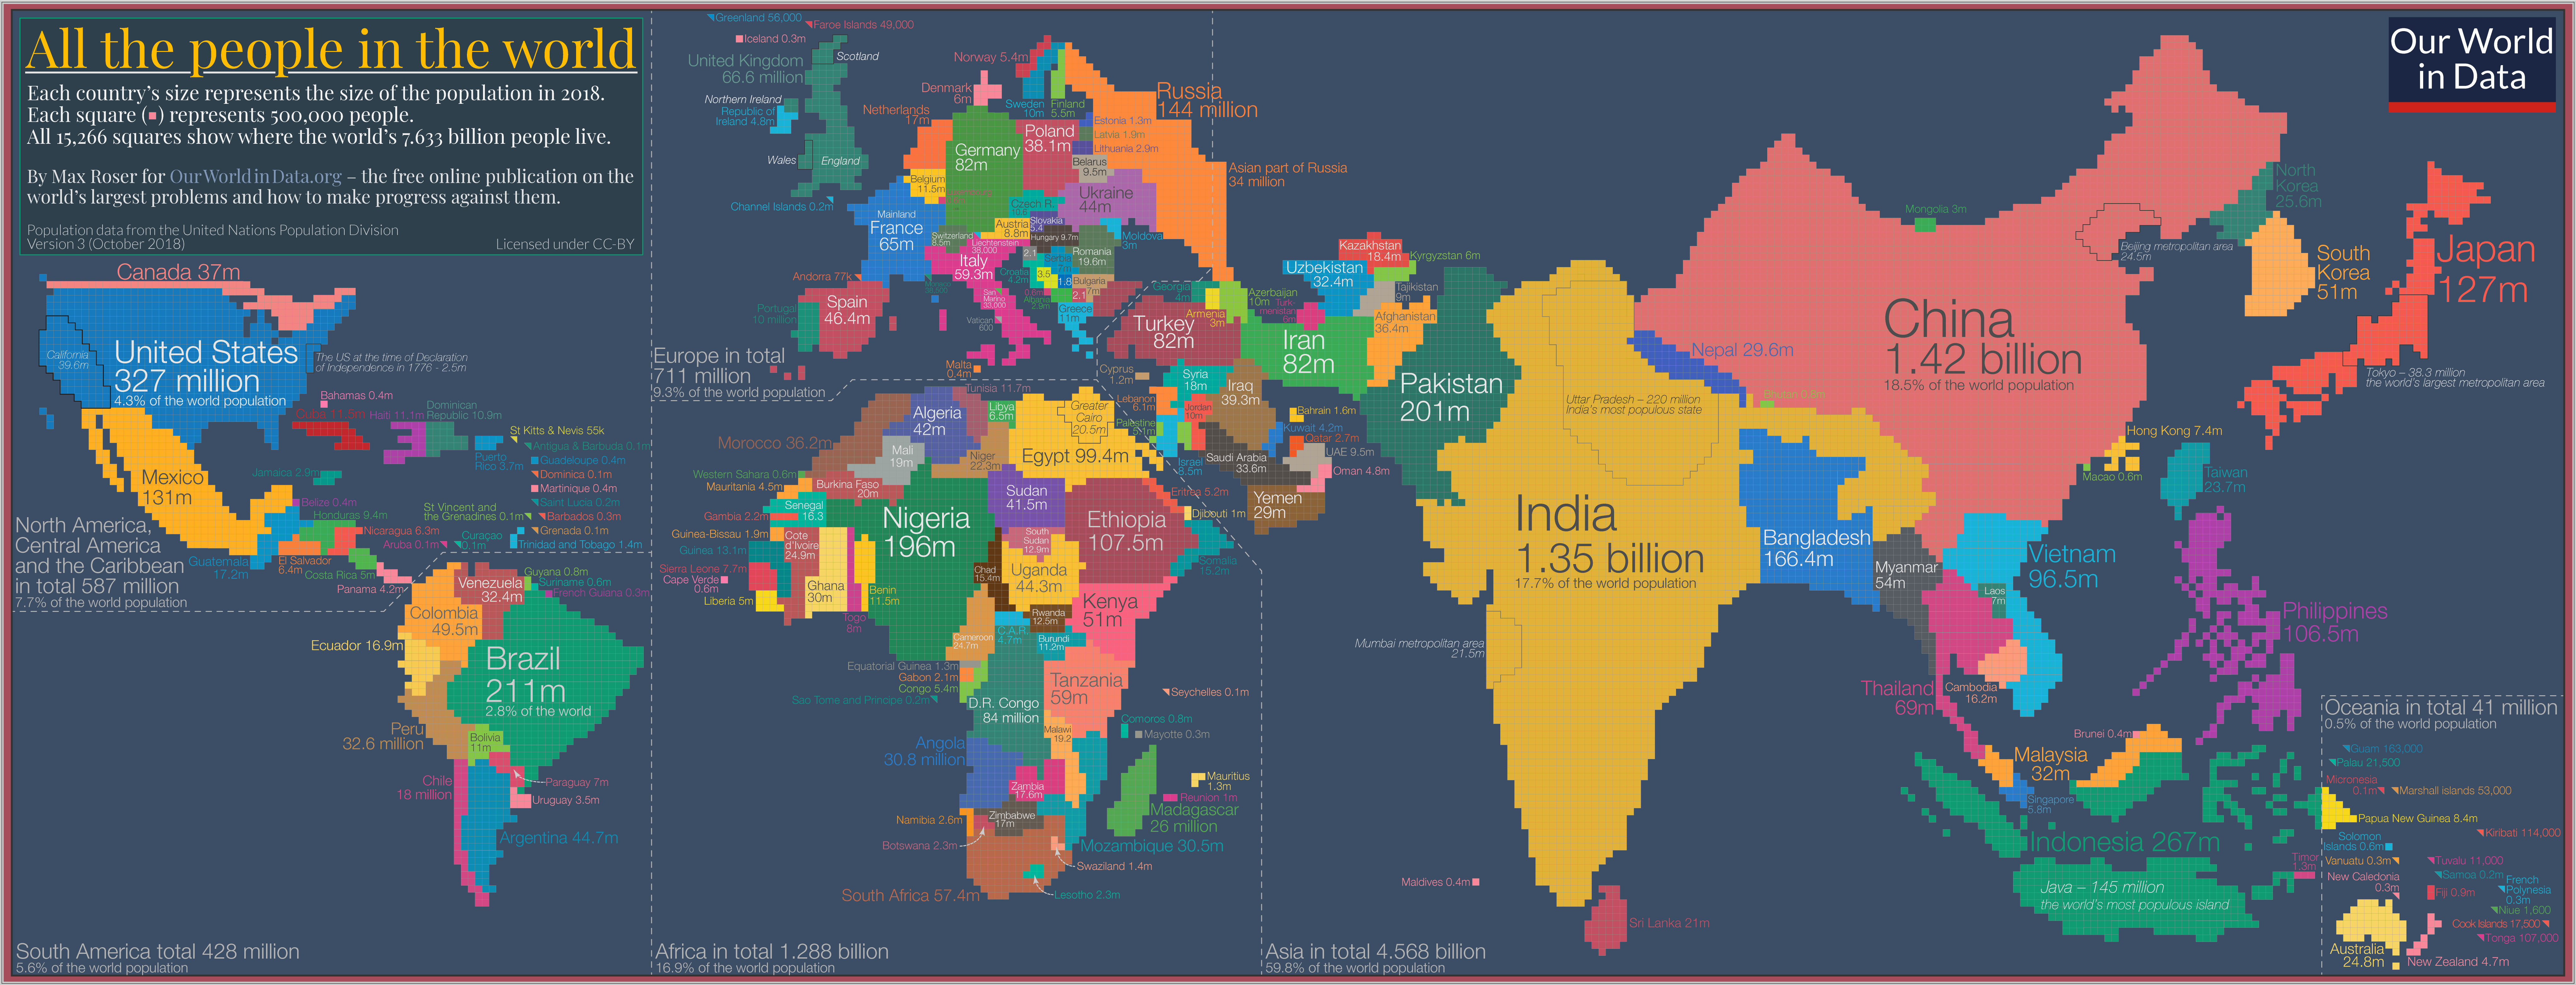 All Places Map - World Map - world map with country names, world map with  all countries, world map with cities and countries, earth map countries,  word map with countries, world map